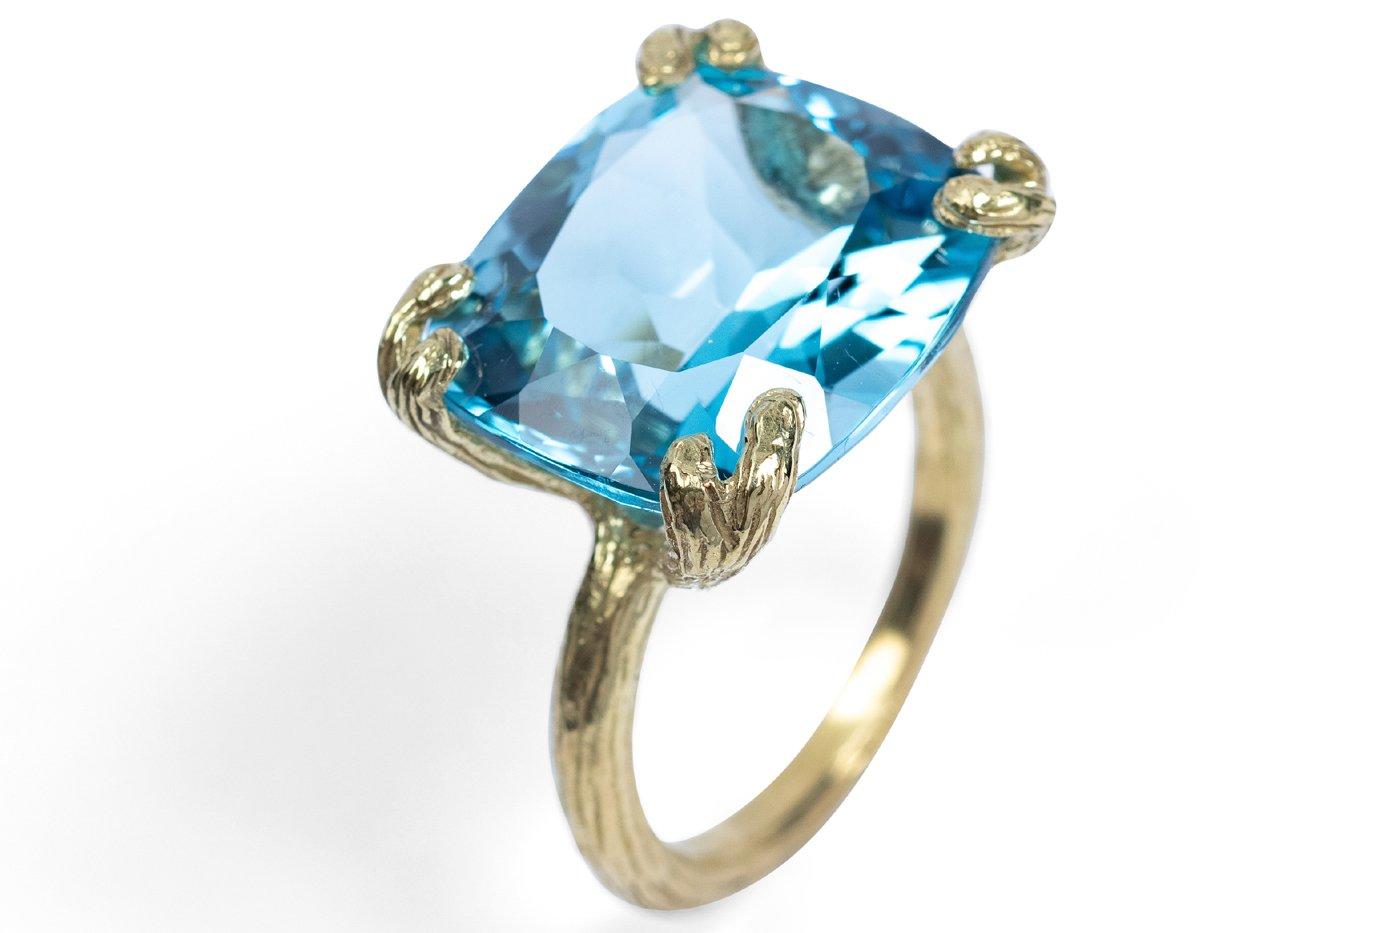 Faceted Swiss blue topaz recalls the brightest summer skies, sparkling atop Gabrielle's 18k textured claw setting. 16x18x10mm Swiss blue topaz.

GSR55BlTpz — Blue topaz 16x18x10mm faceted rectangle18k textured claw ring
